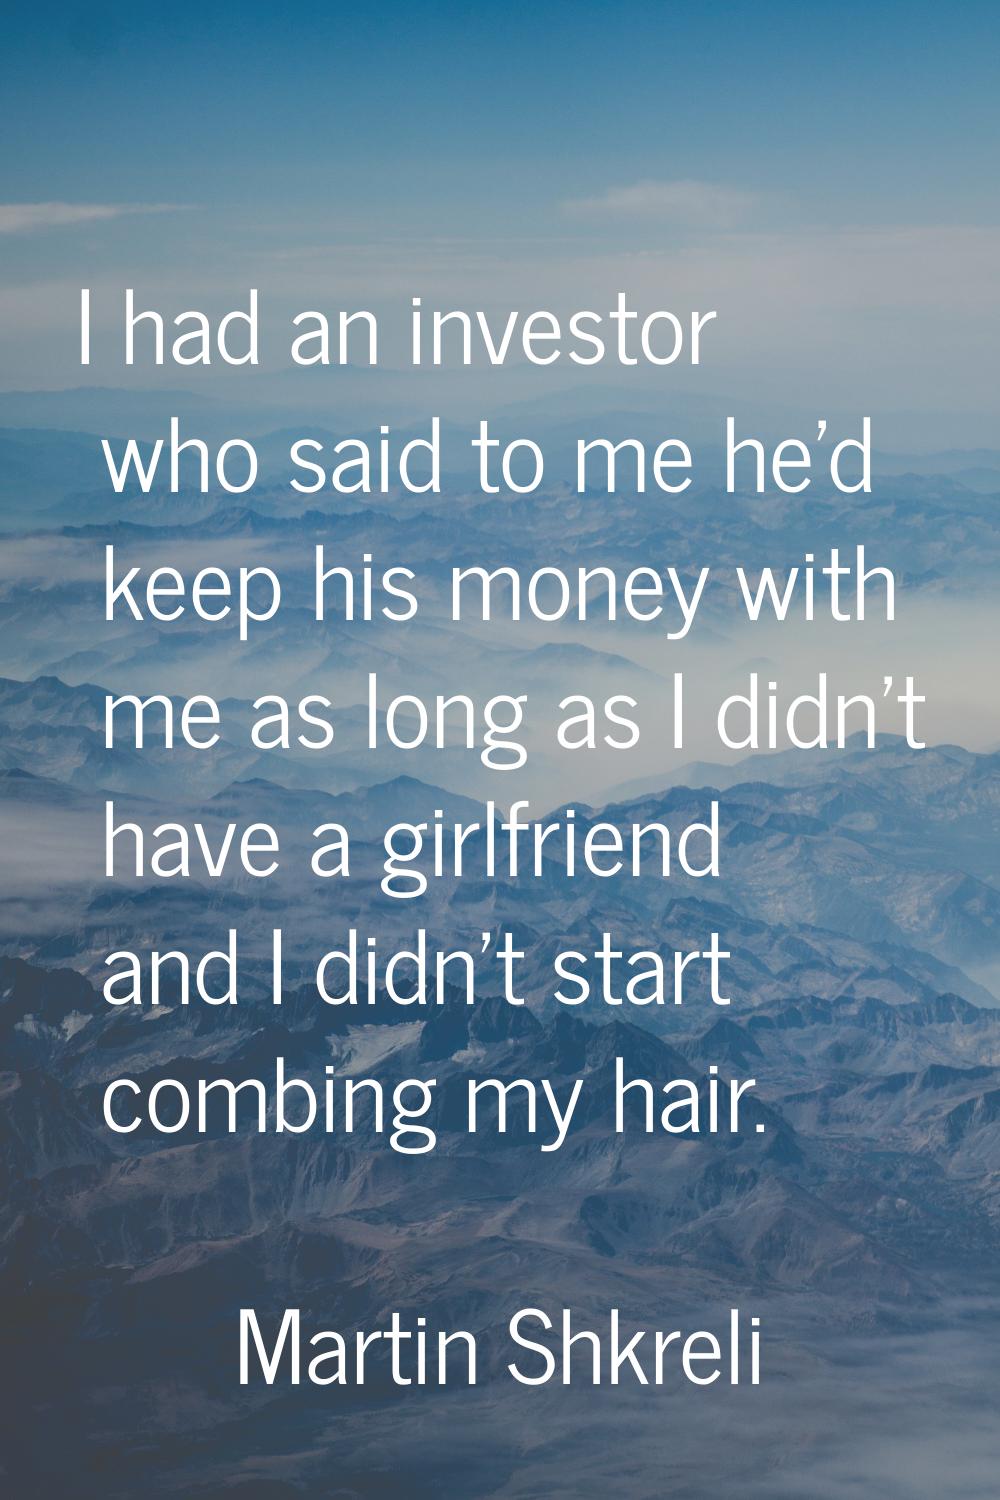 I had an investor who said to me he'd keep his money with me as long as I didn't have a girlfriend 